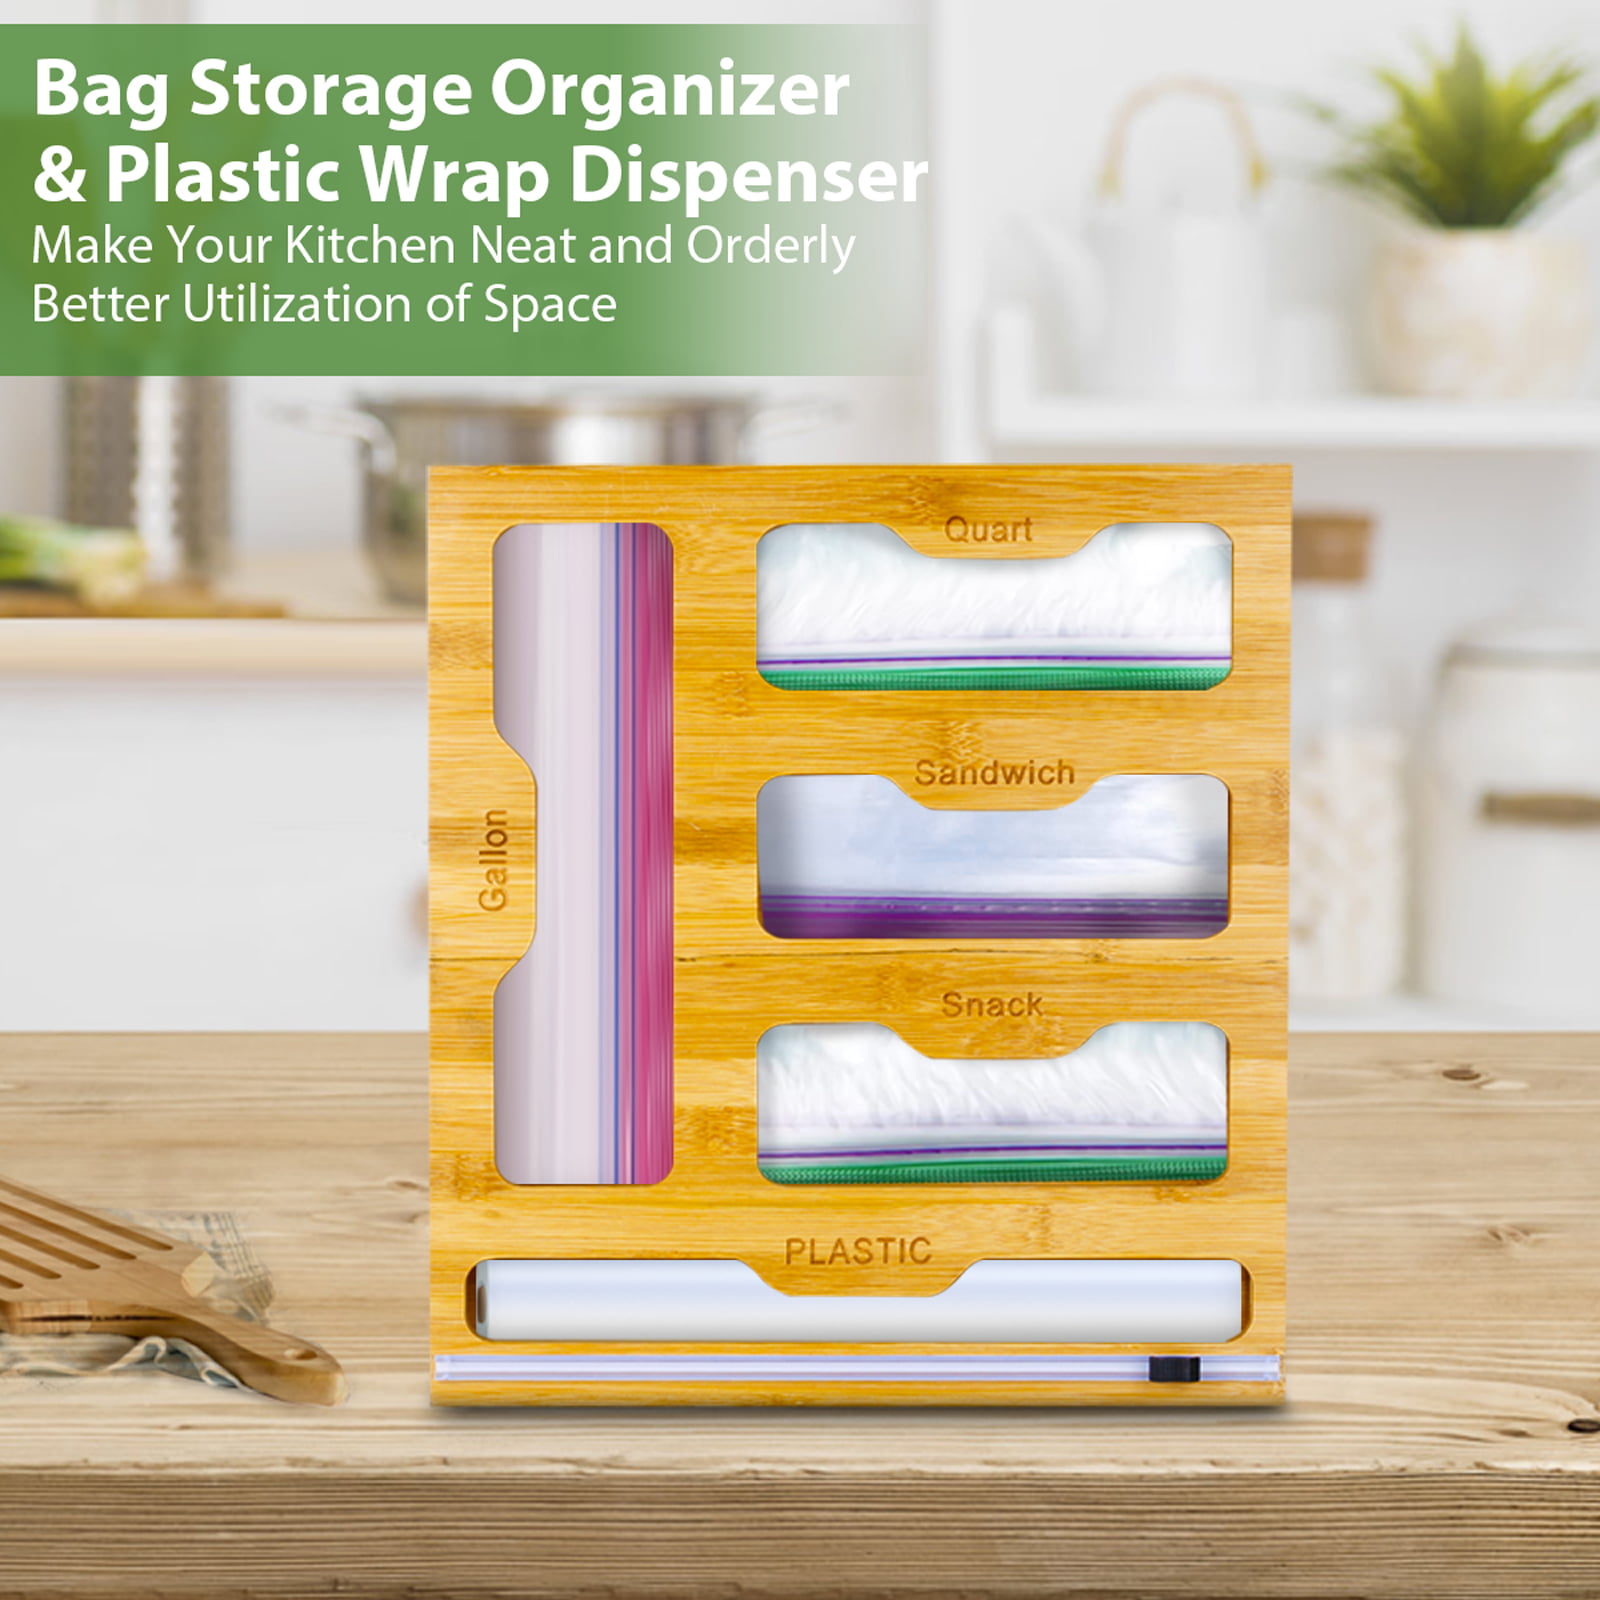 SOGUAOLO Bamboo Ziplock Bag Storage Organizer and Dispenser for Kitchen  Drawer–Food Storage Bag Holders Compatible With Gallon, Quart, Sandwich 